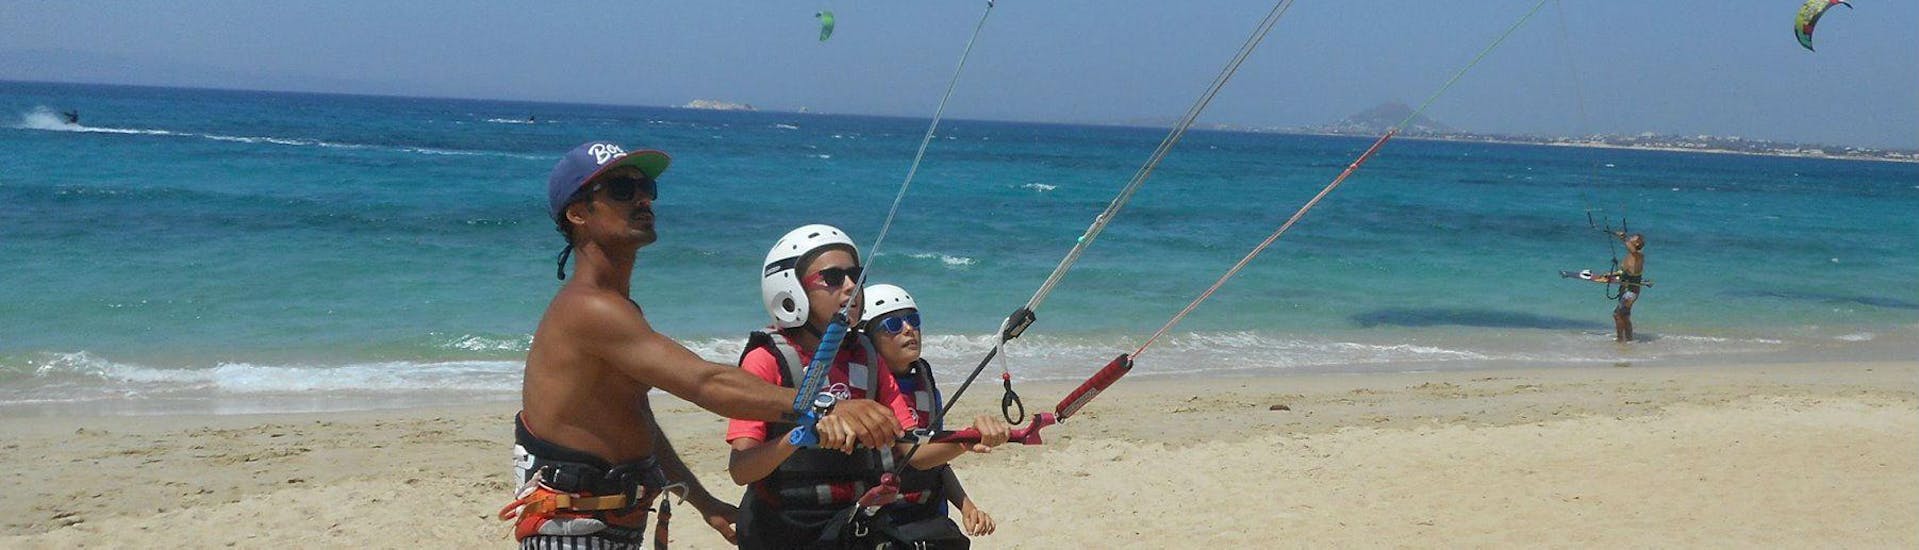 Private Kitesurfing Lessons for 2 - Beginners with Flisvos Kite Centre Naxos - Hero image